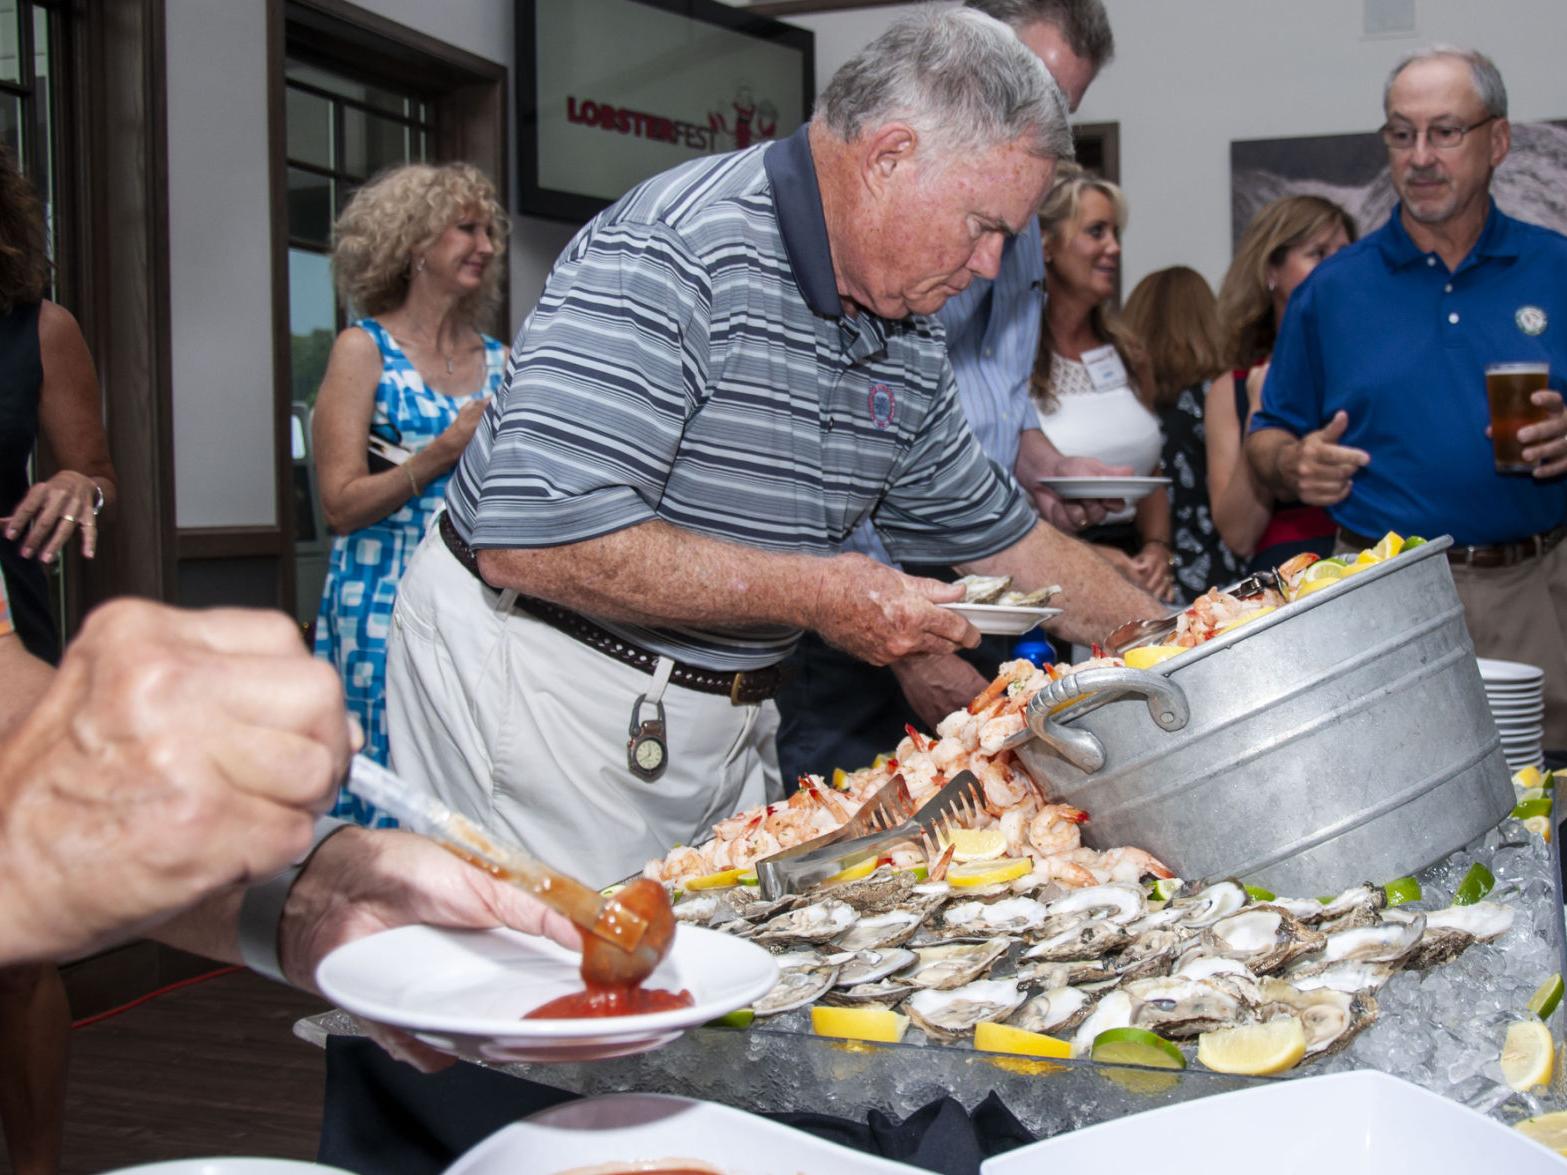 Photos Lobsterfest Raises Funds For Mooresville Soup Kitchen Galleries Statesville Com